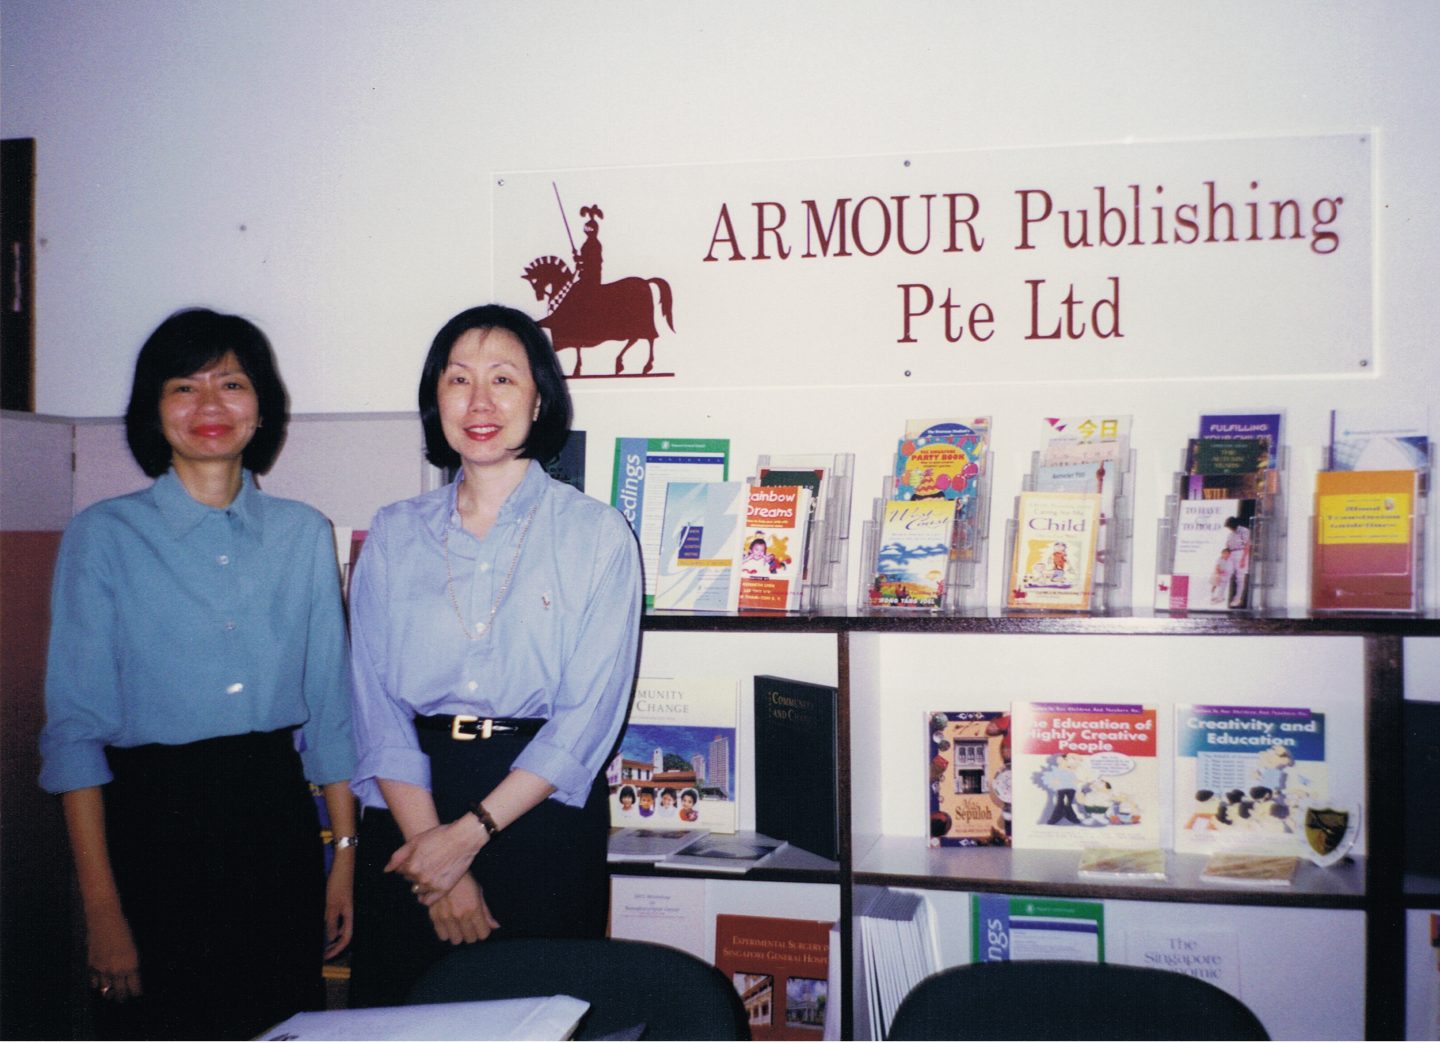 Christina Lim standing on the left and Bernice Lee, on the right started Armour Publishing in 1991. 